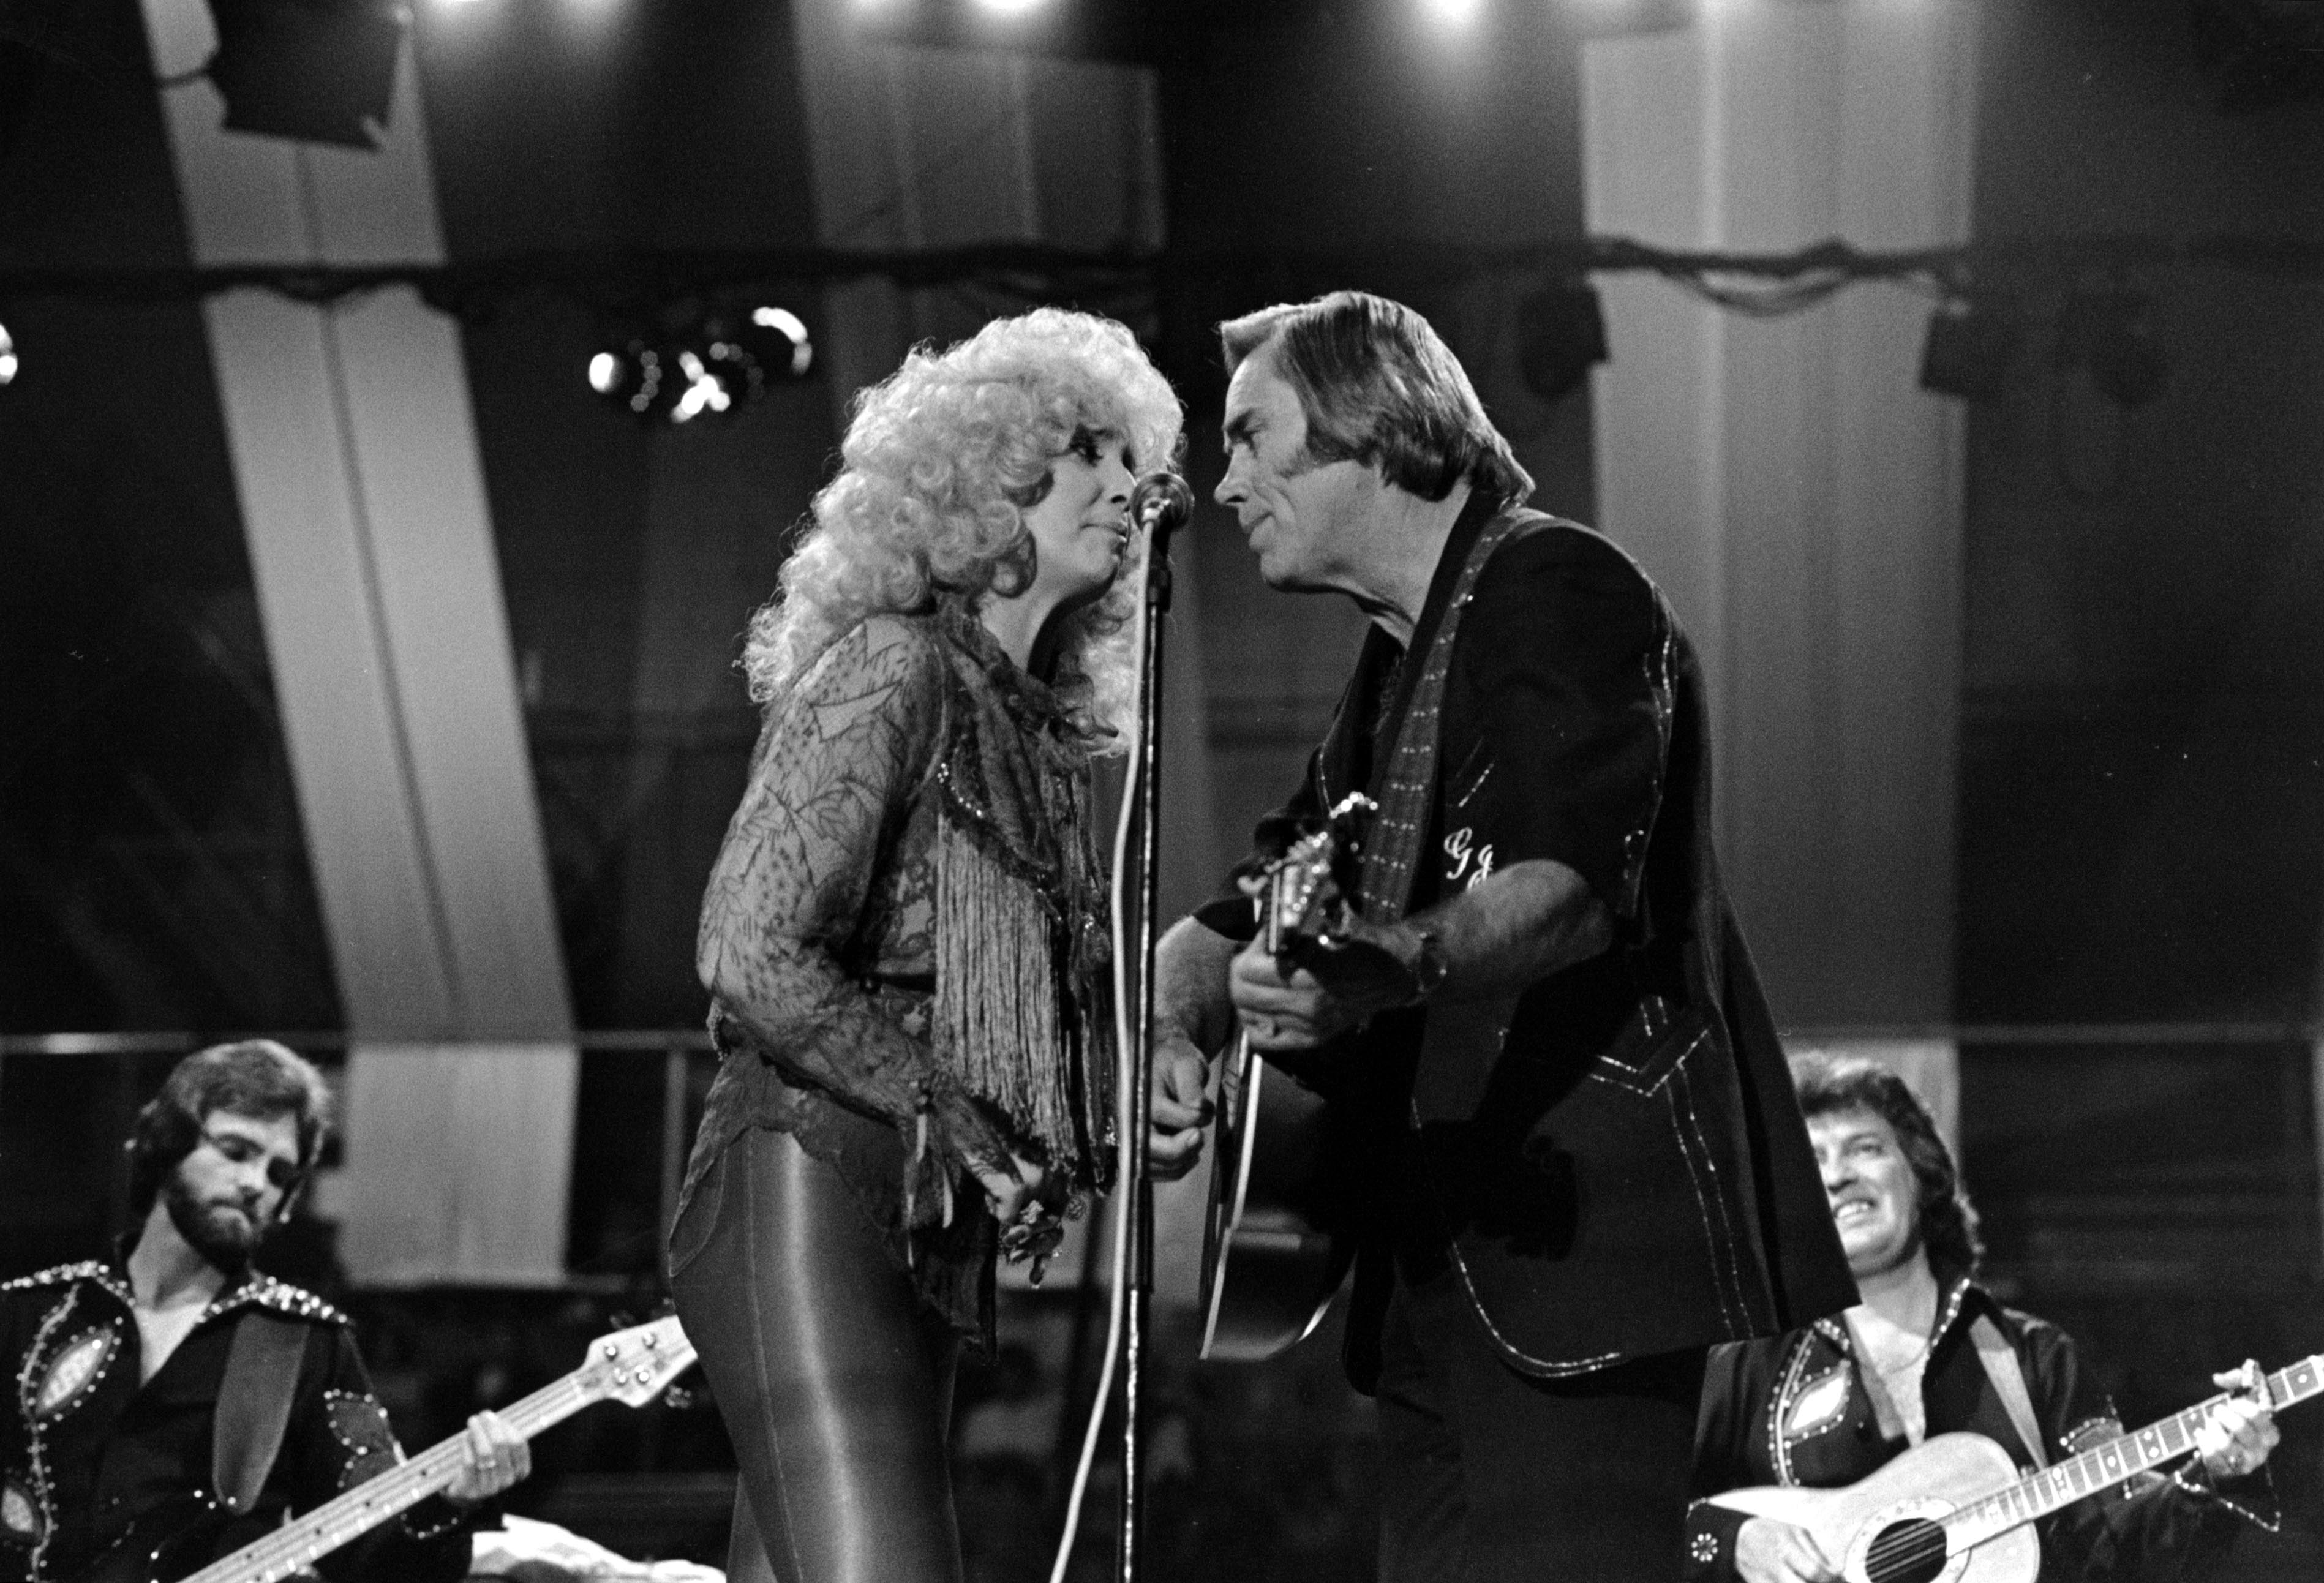 Tammy Wynette And George Jones, Wembley Arena, London - 1981, Tammy Wynette And George Jones, Wembley Arena, London - 1981. | Photo: Getty Images